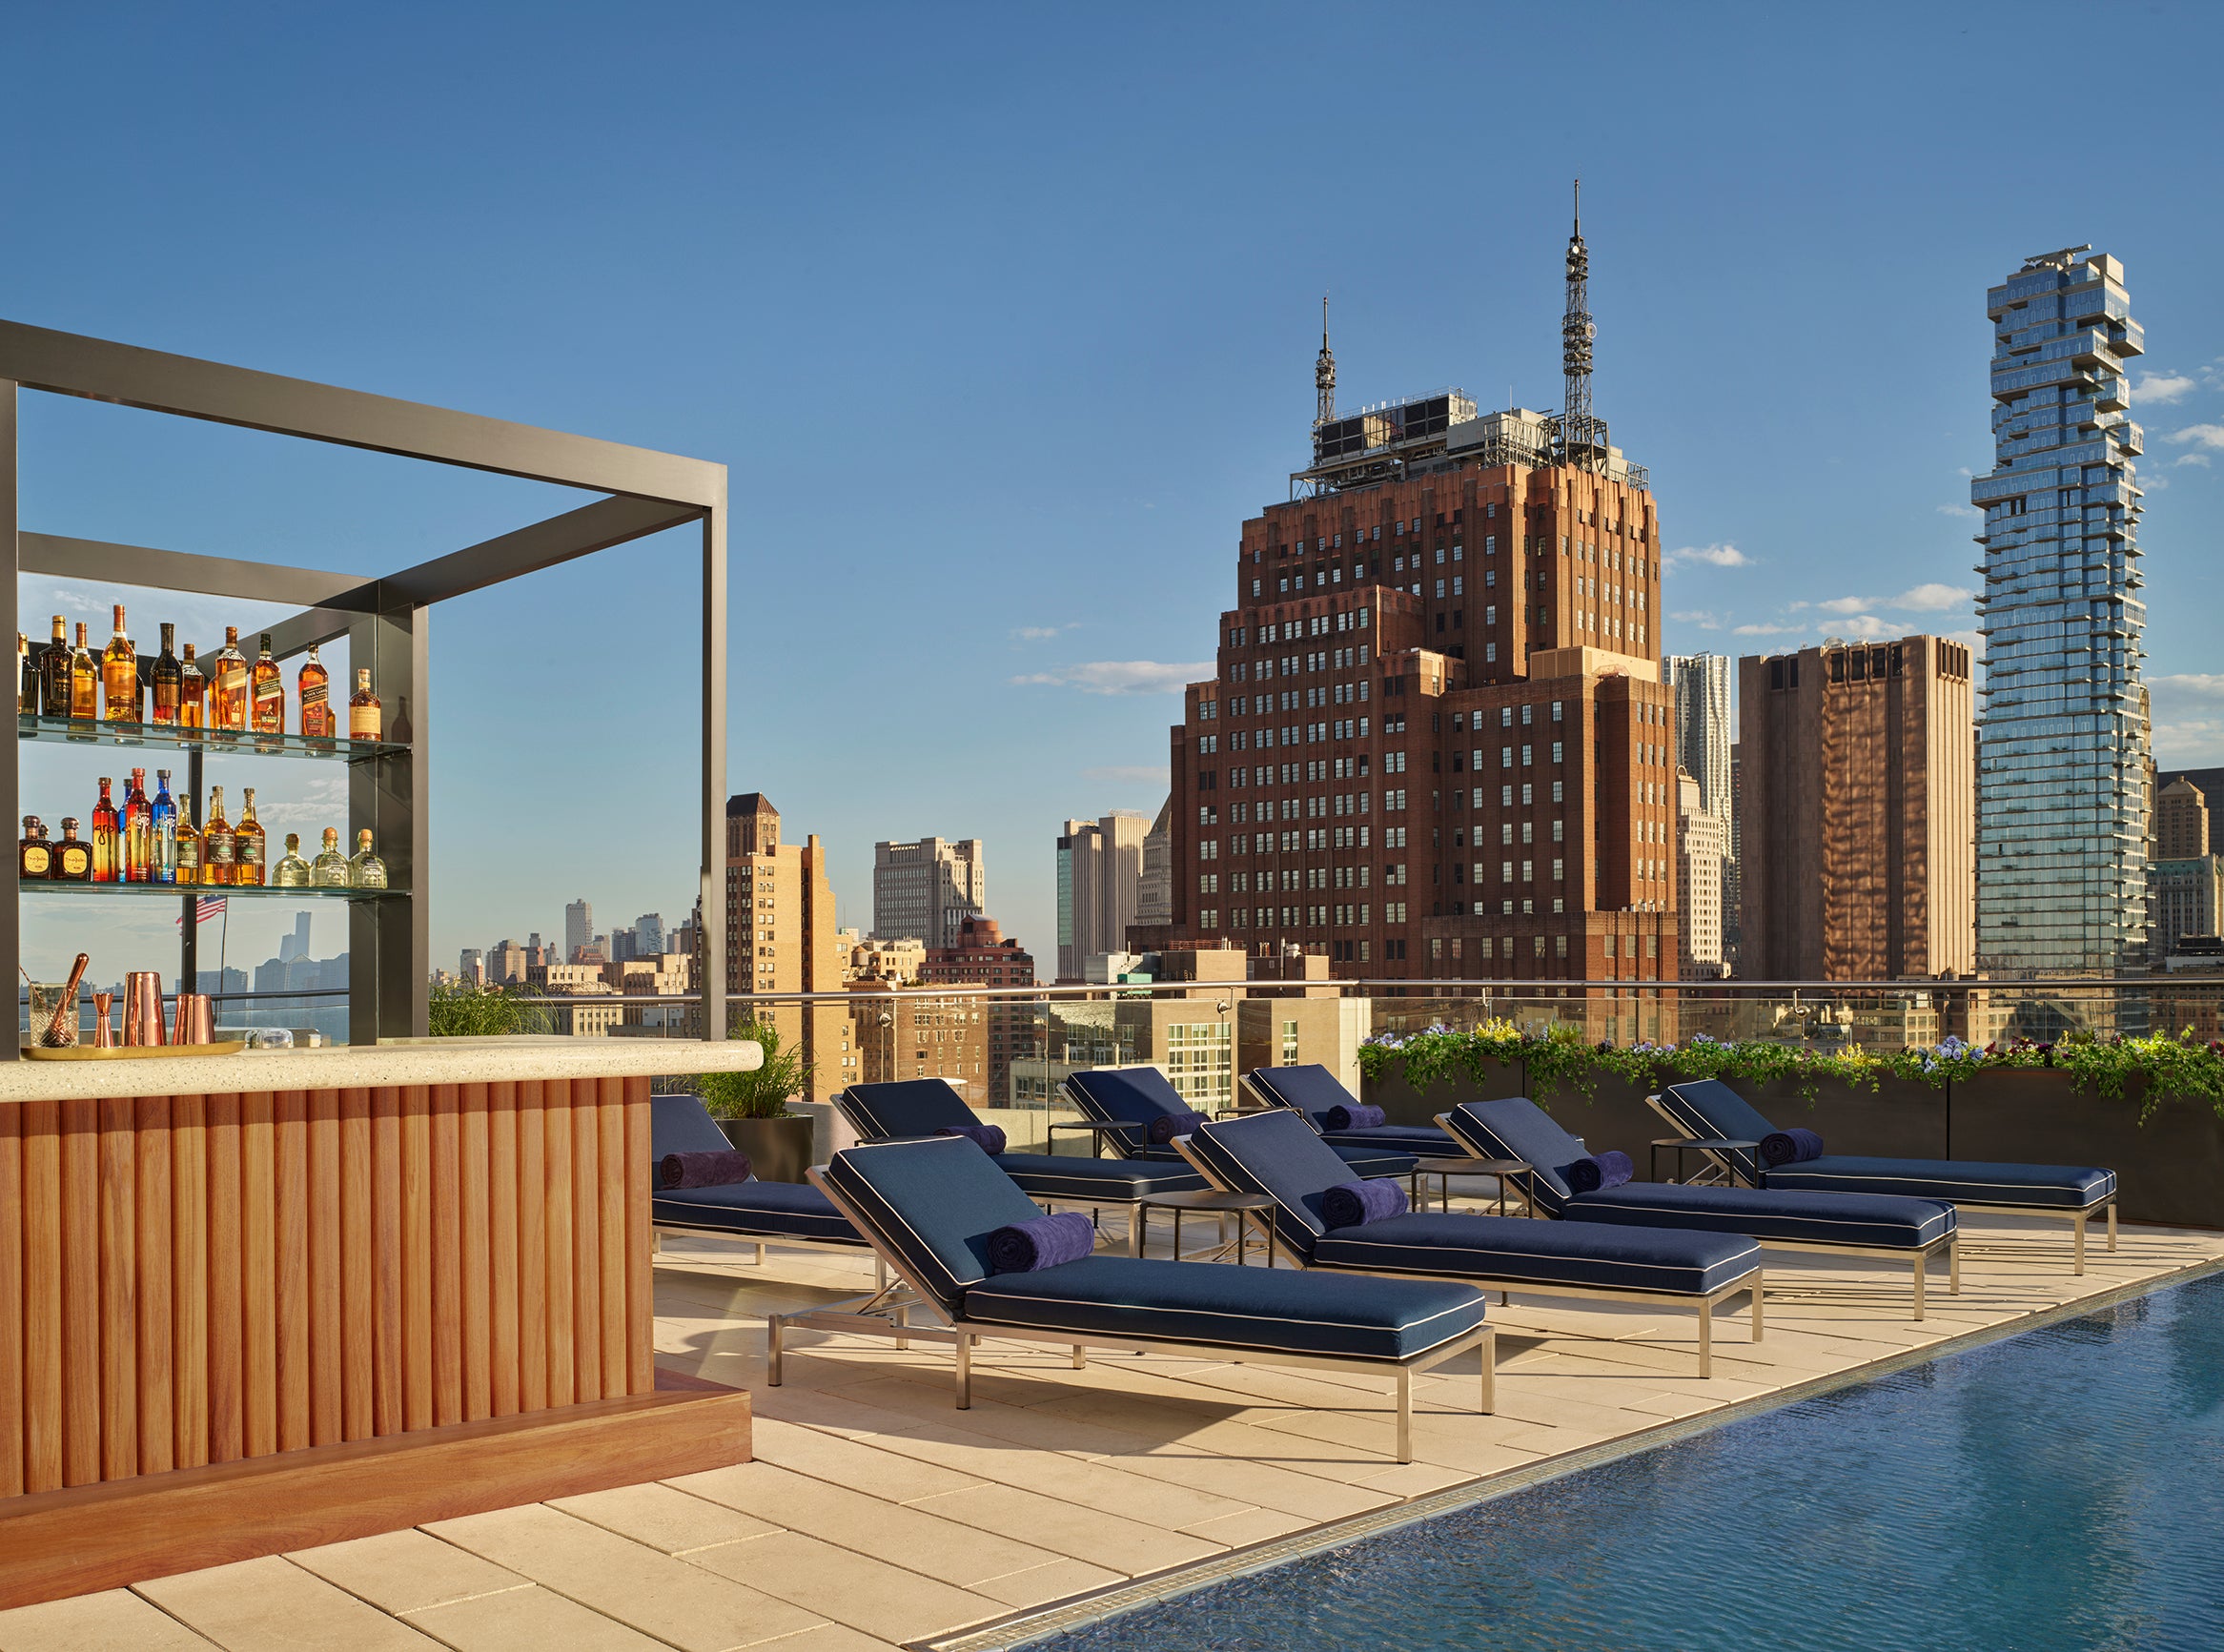 VIP Pet Package  Hotel Offers at the Empire Hotel New York